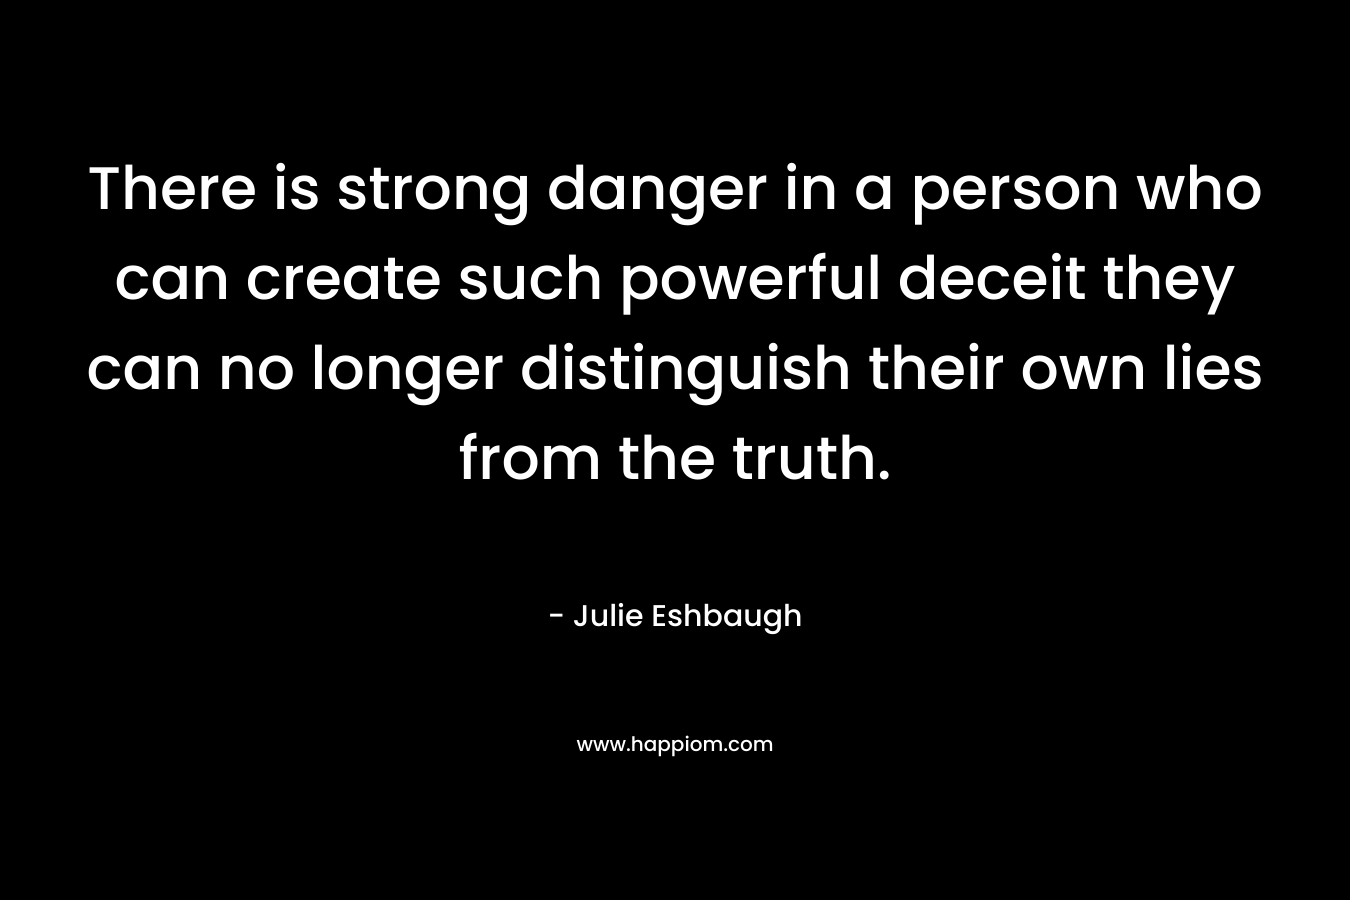 There is strong danger in a person who can create such powerful deceit they can no longer distinguish their own lies from the truth. – Julie Eshbaugh